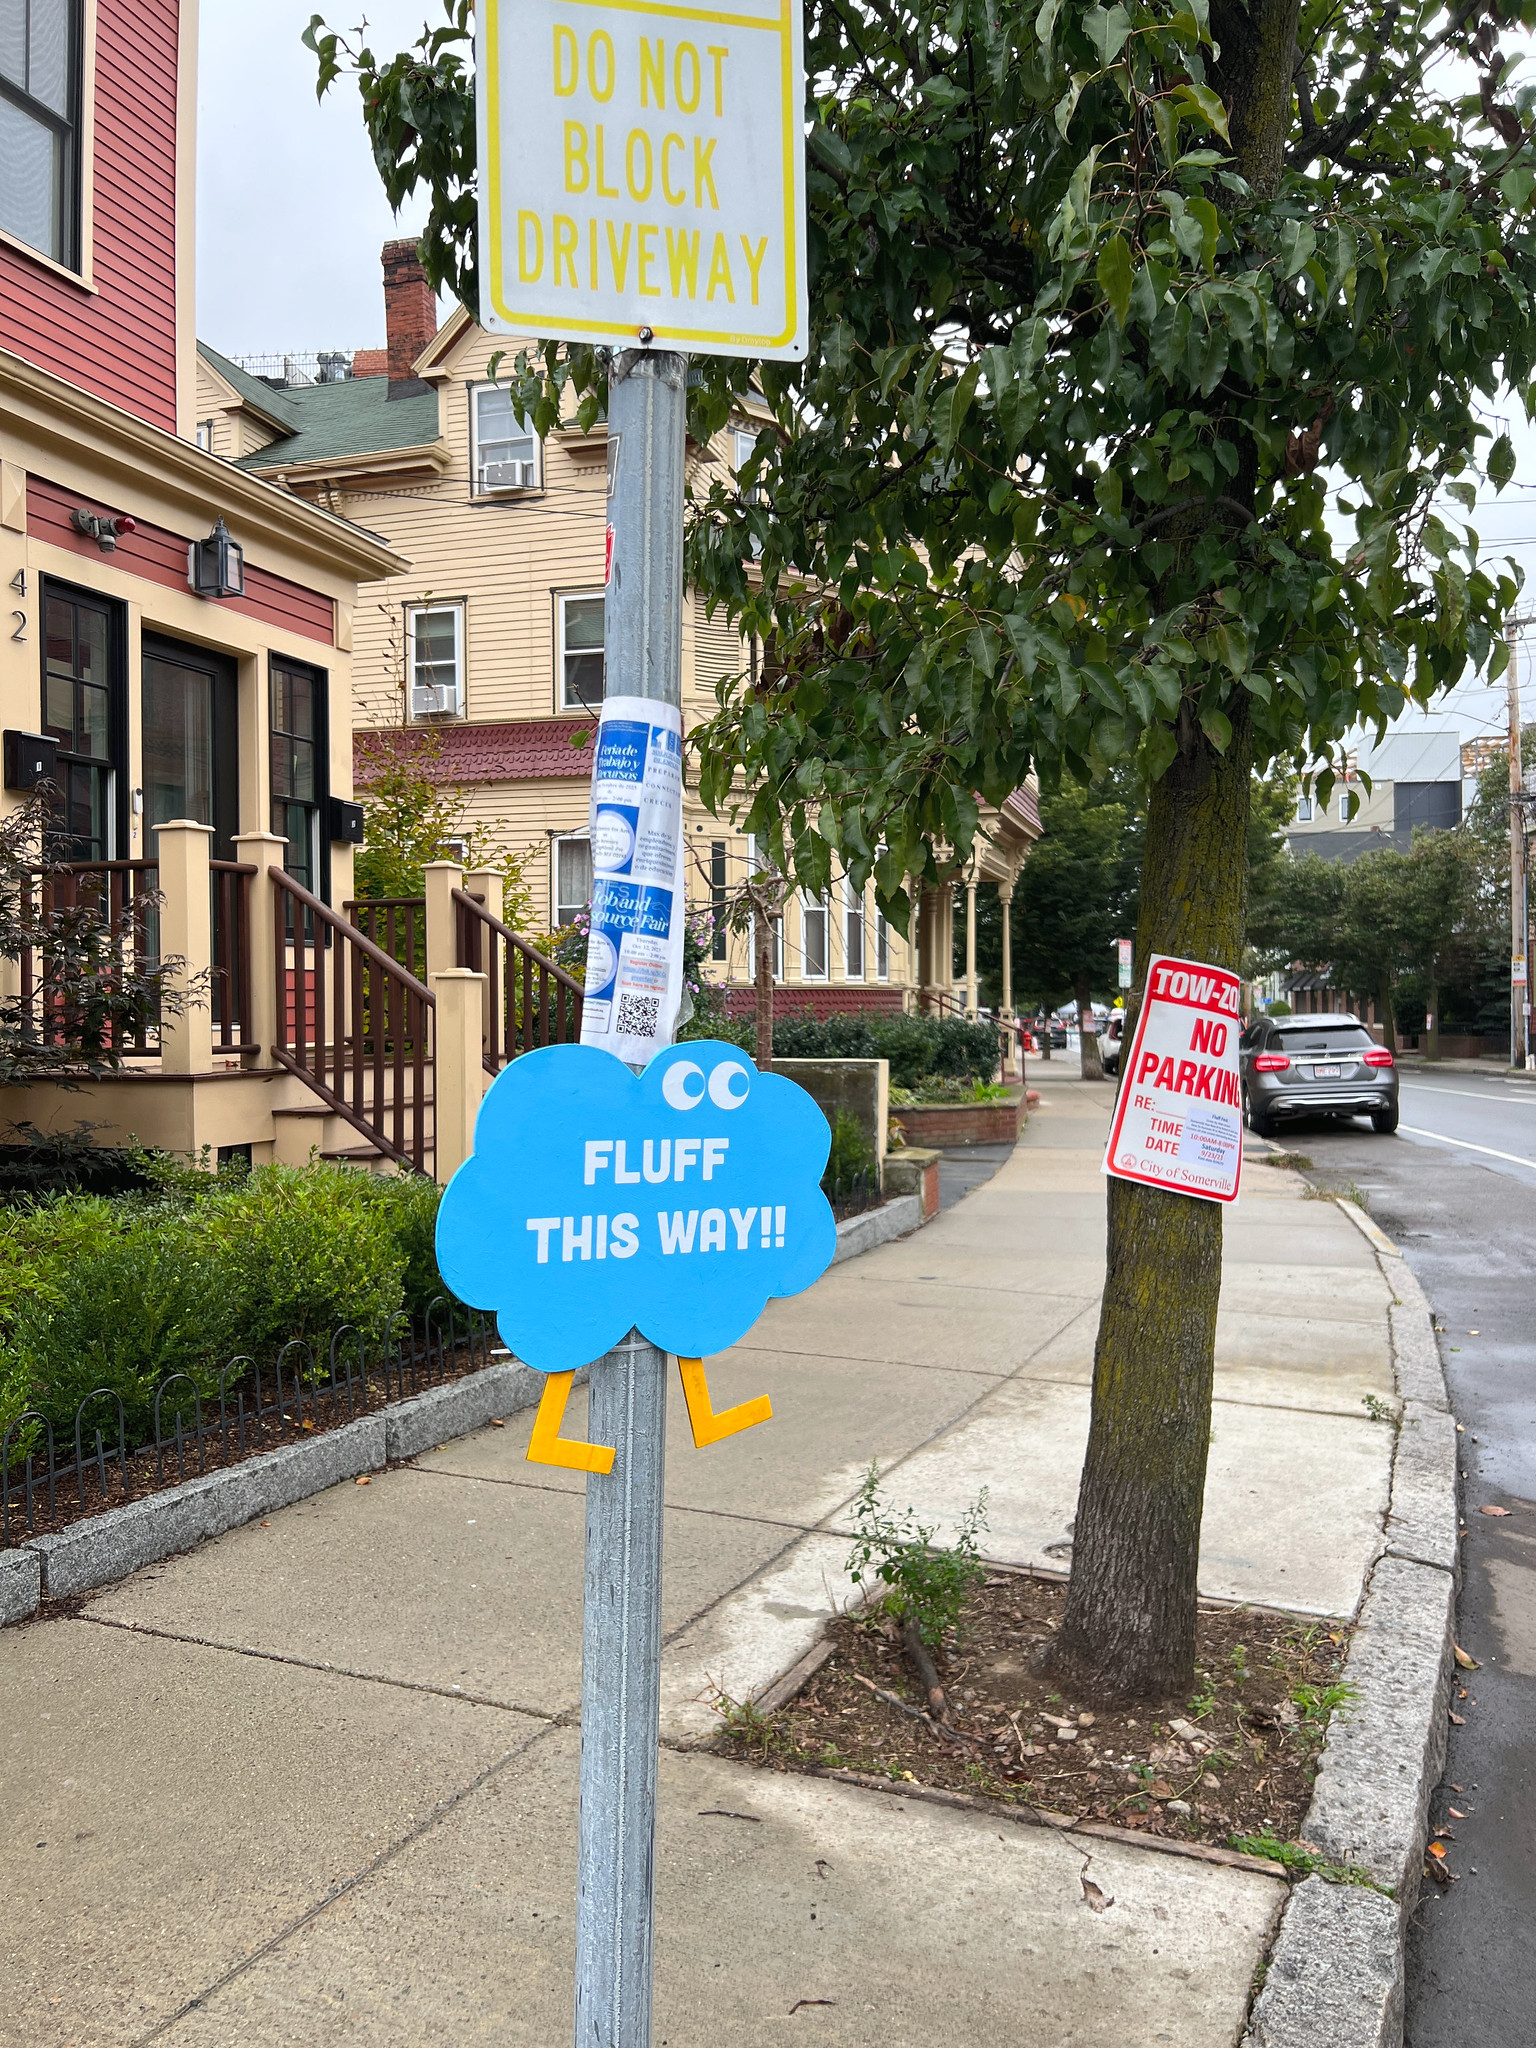 A cloud-shaped sign mounted on a street pole reads "Fluff this way!". The cloud has legs and eyes.